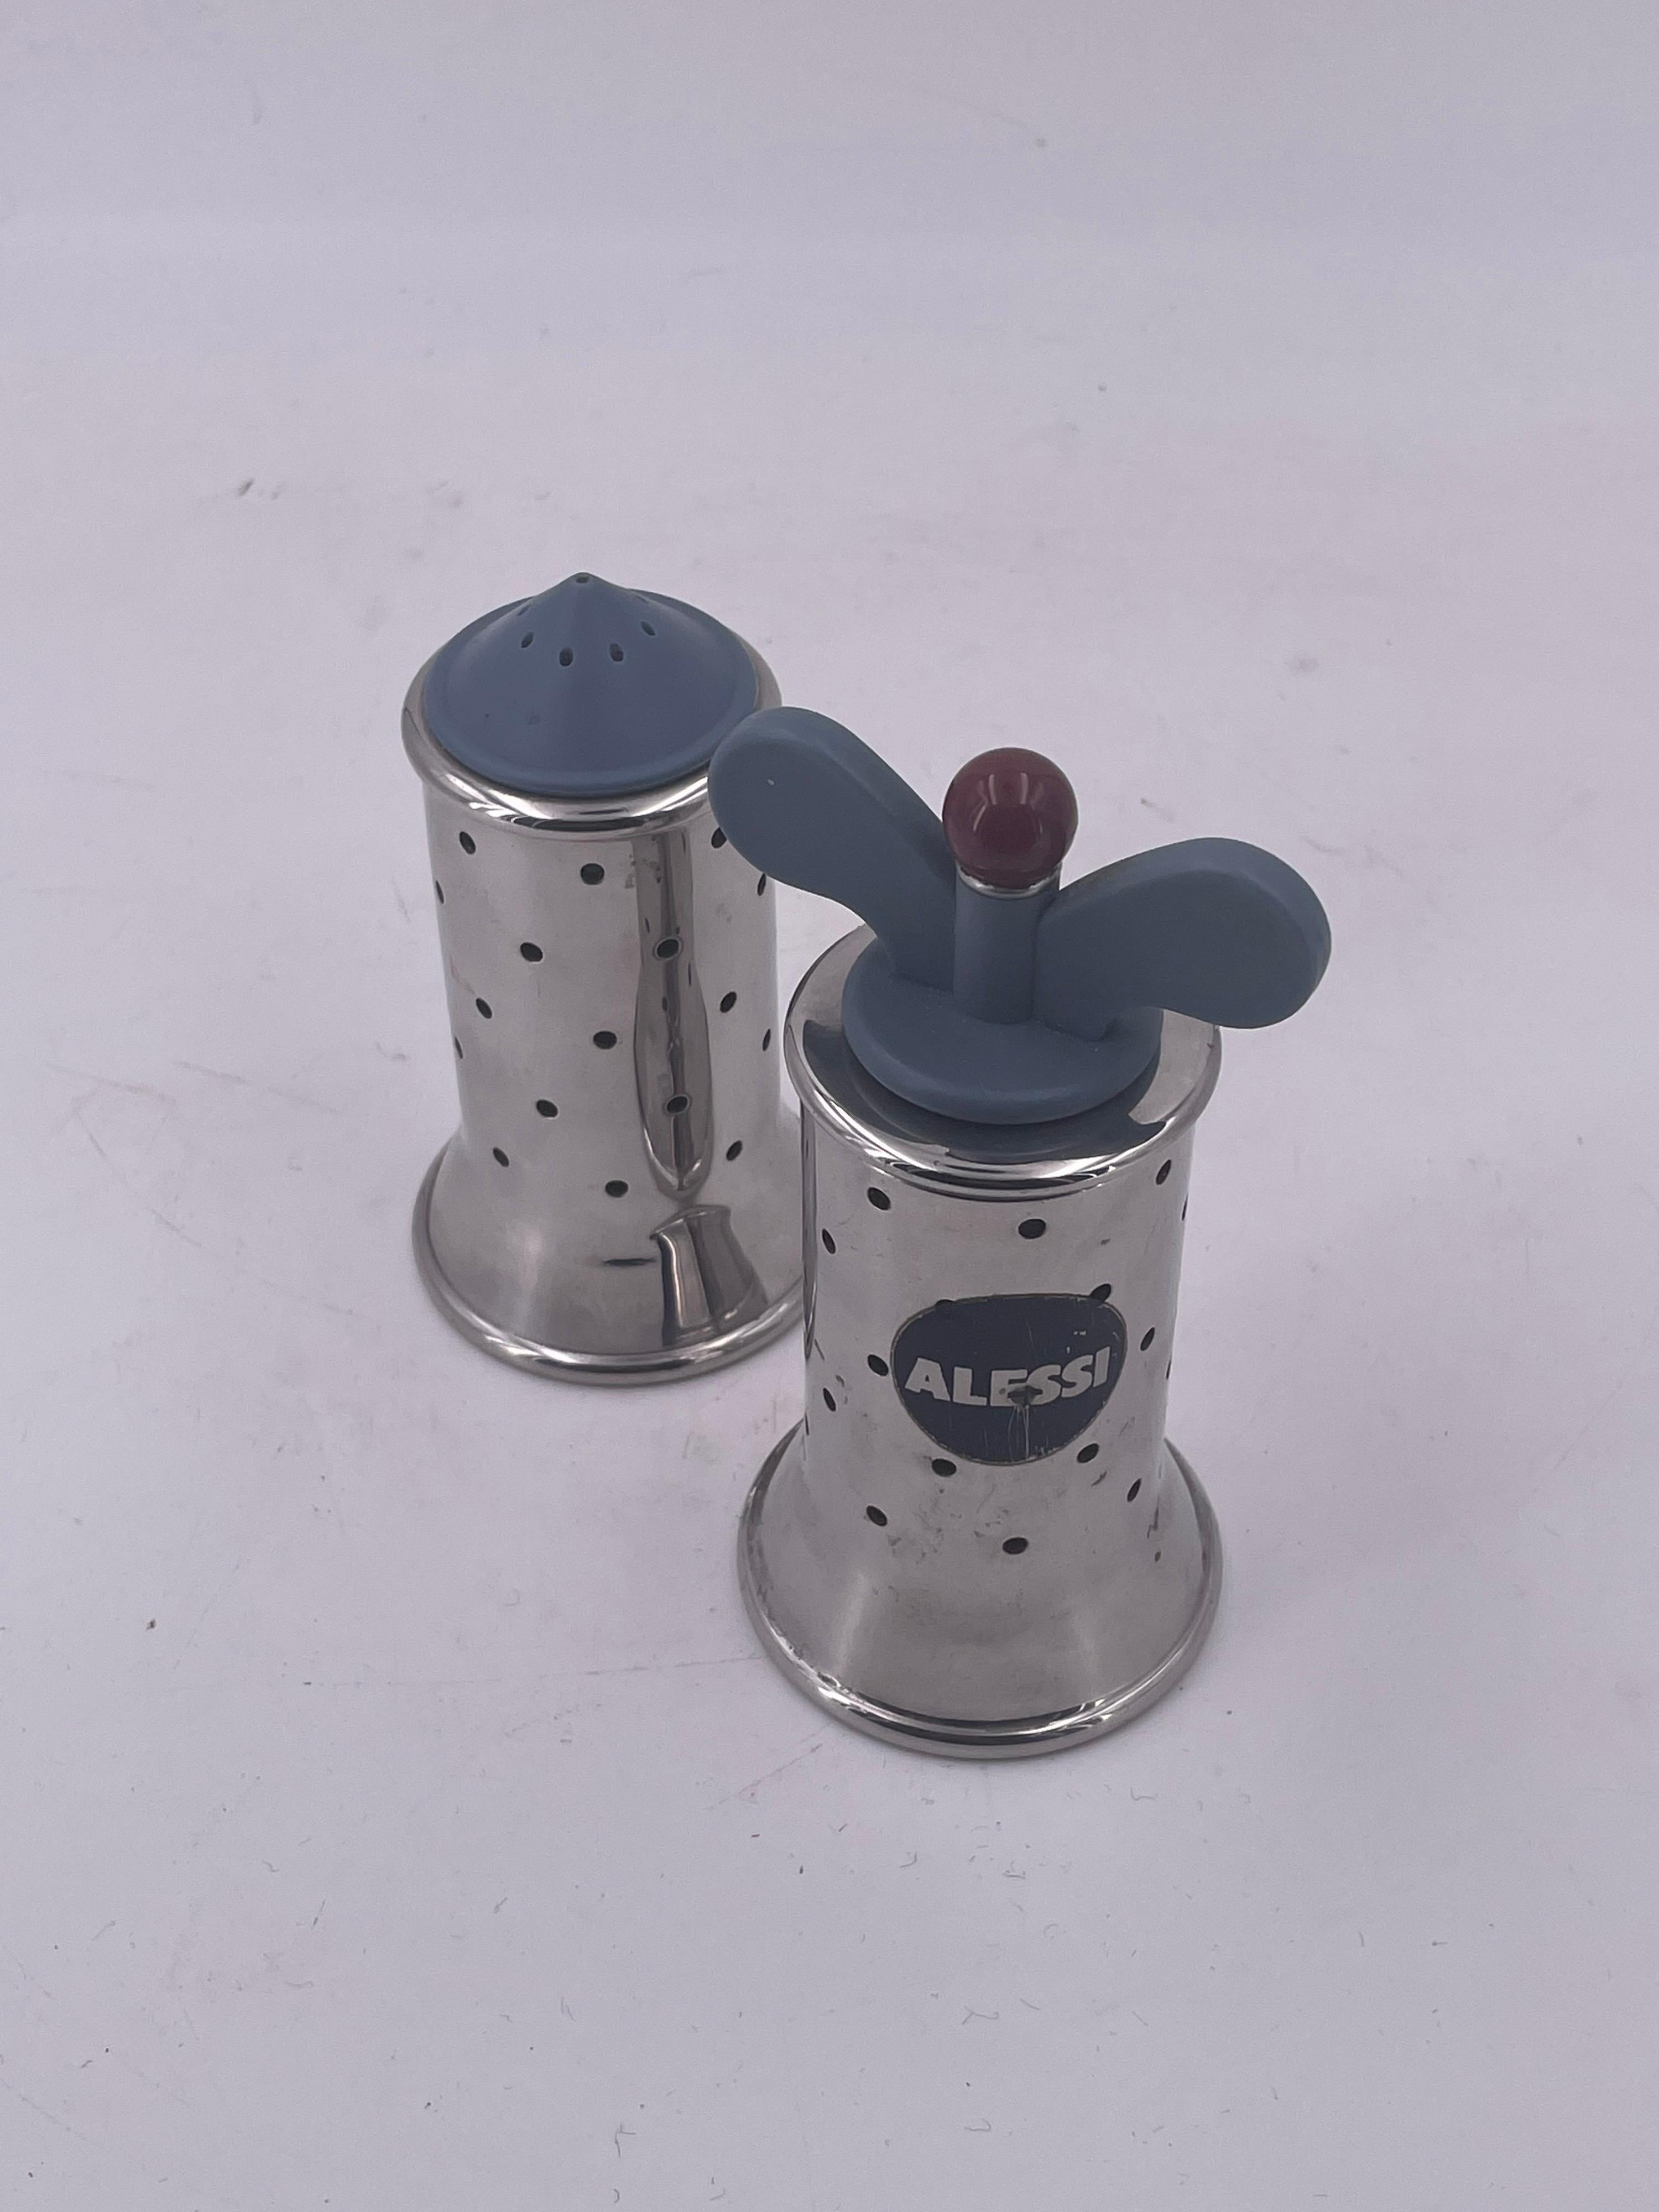 michael graves salt and pepper shakers